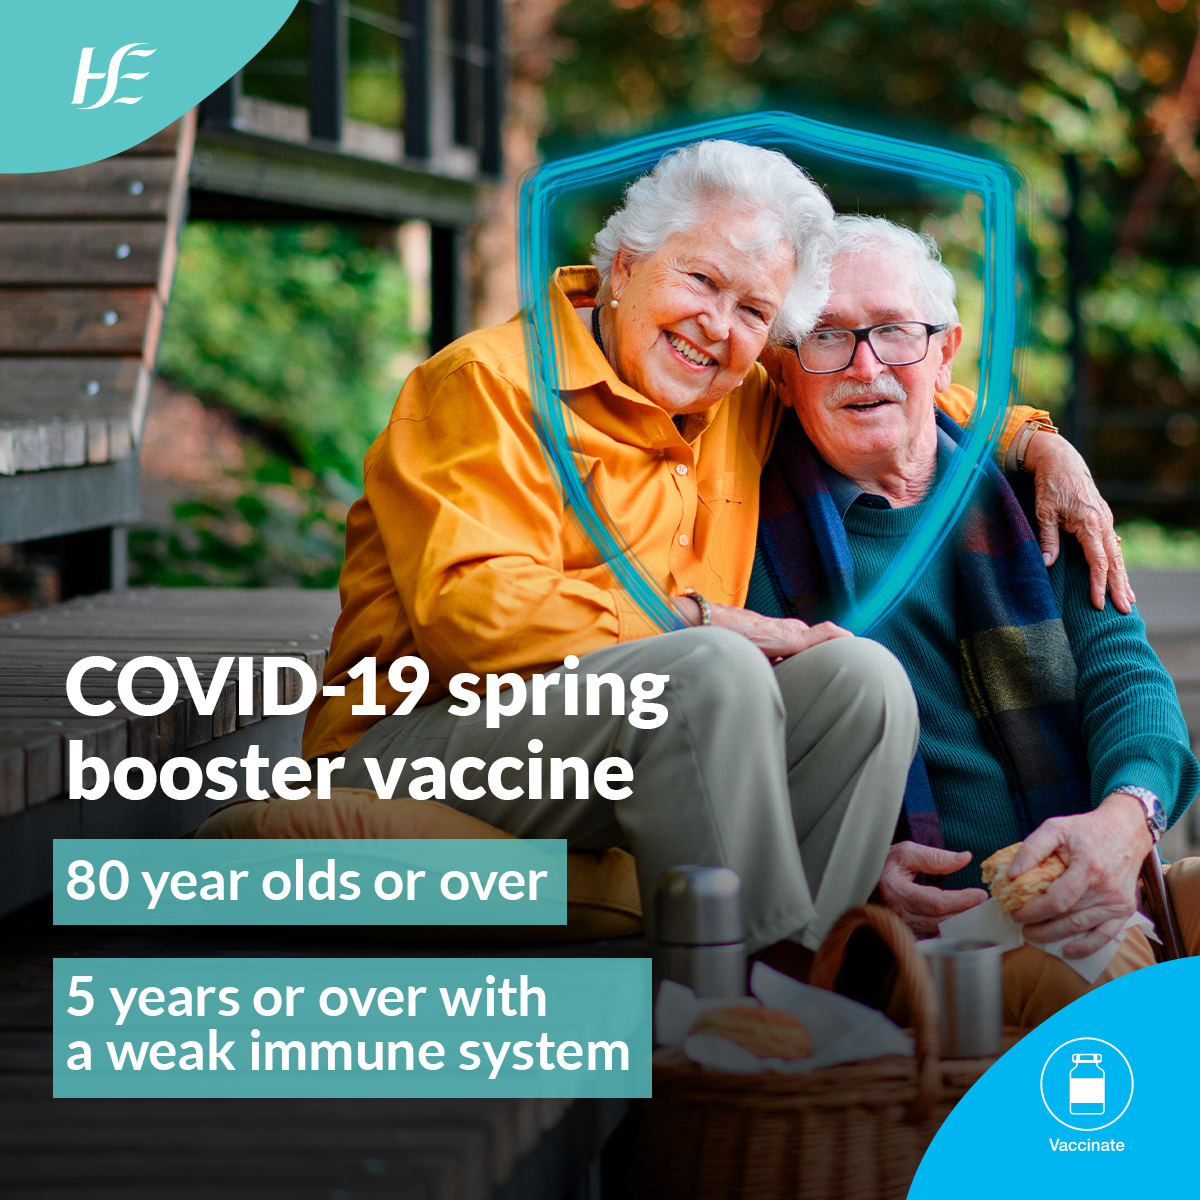 Getting vaccinated is the best way we can protect ourselves from COVID-19. If you're 80 or over, or you have a weak immune system, it's time for your recommended spring booster. For more information, visit: bit.ly/44JO1wm #COVIDVaccine